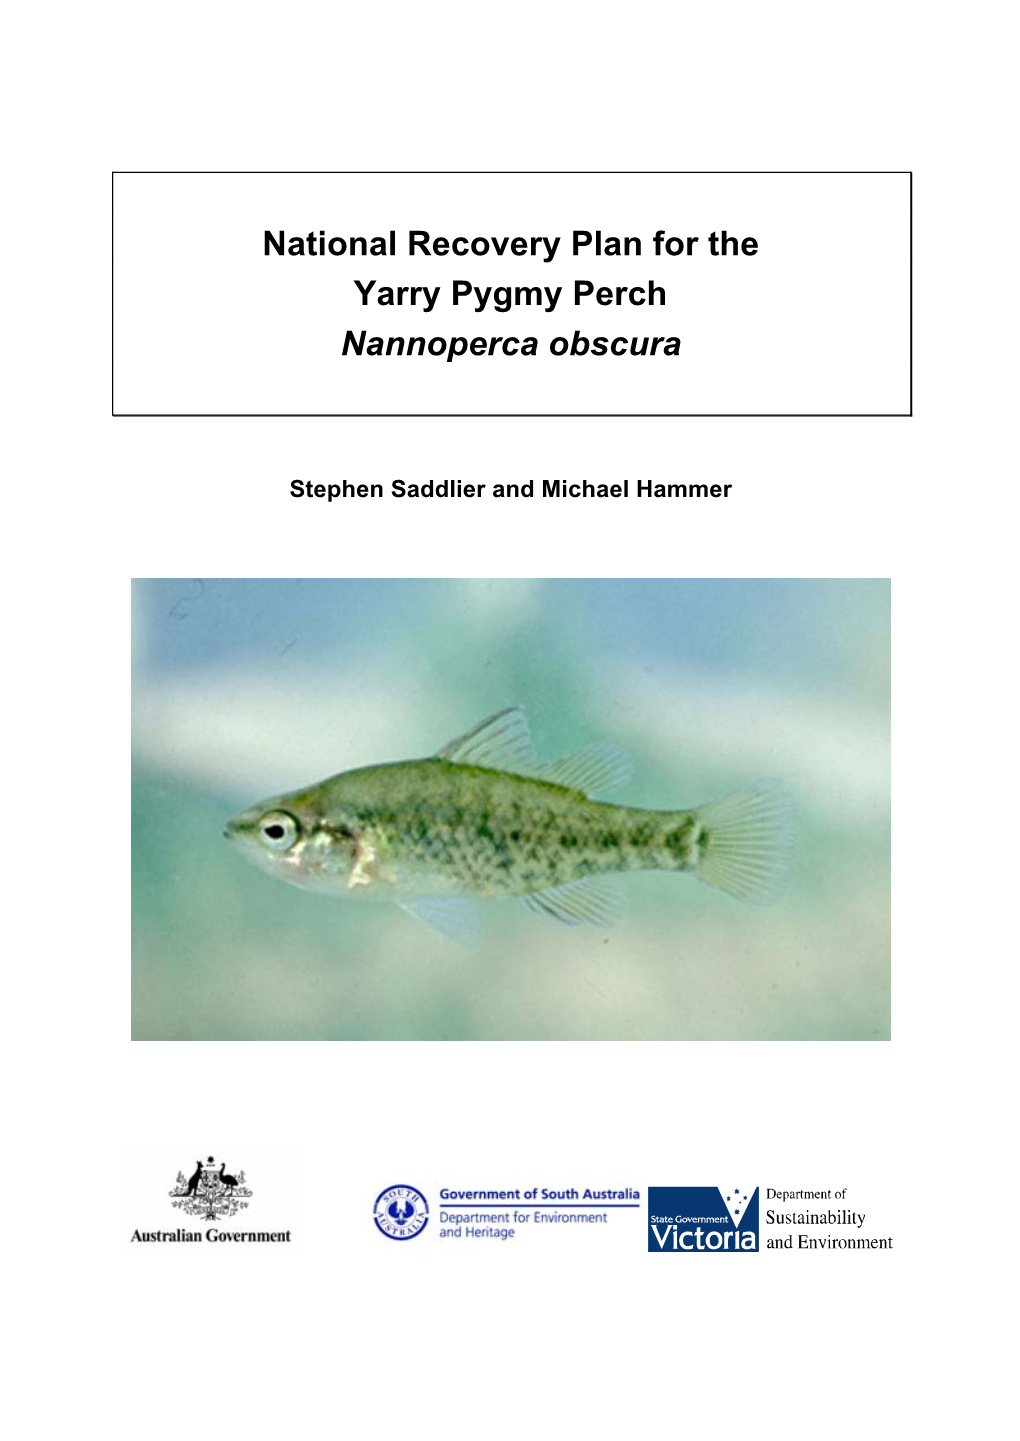 National Recovery Plan for the Yarra Pygmy Perch Nannoperca Obscura